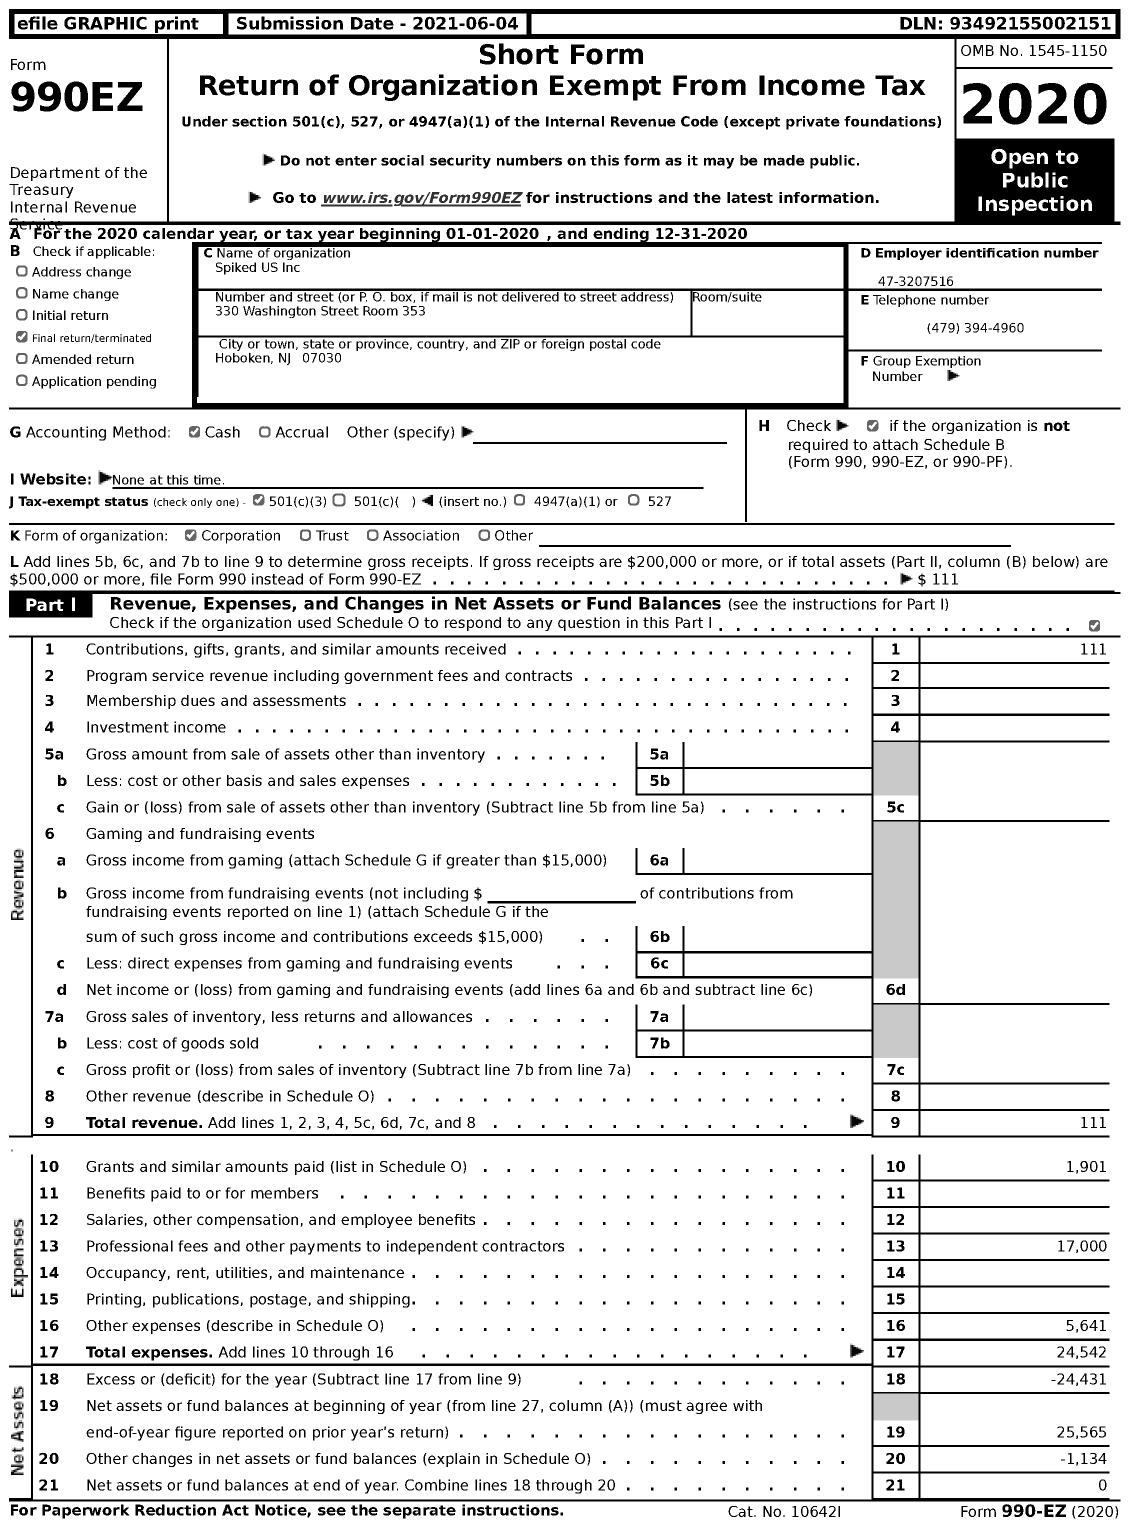 Image of first page of 2020 Form 990EZ for Spiked US